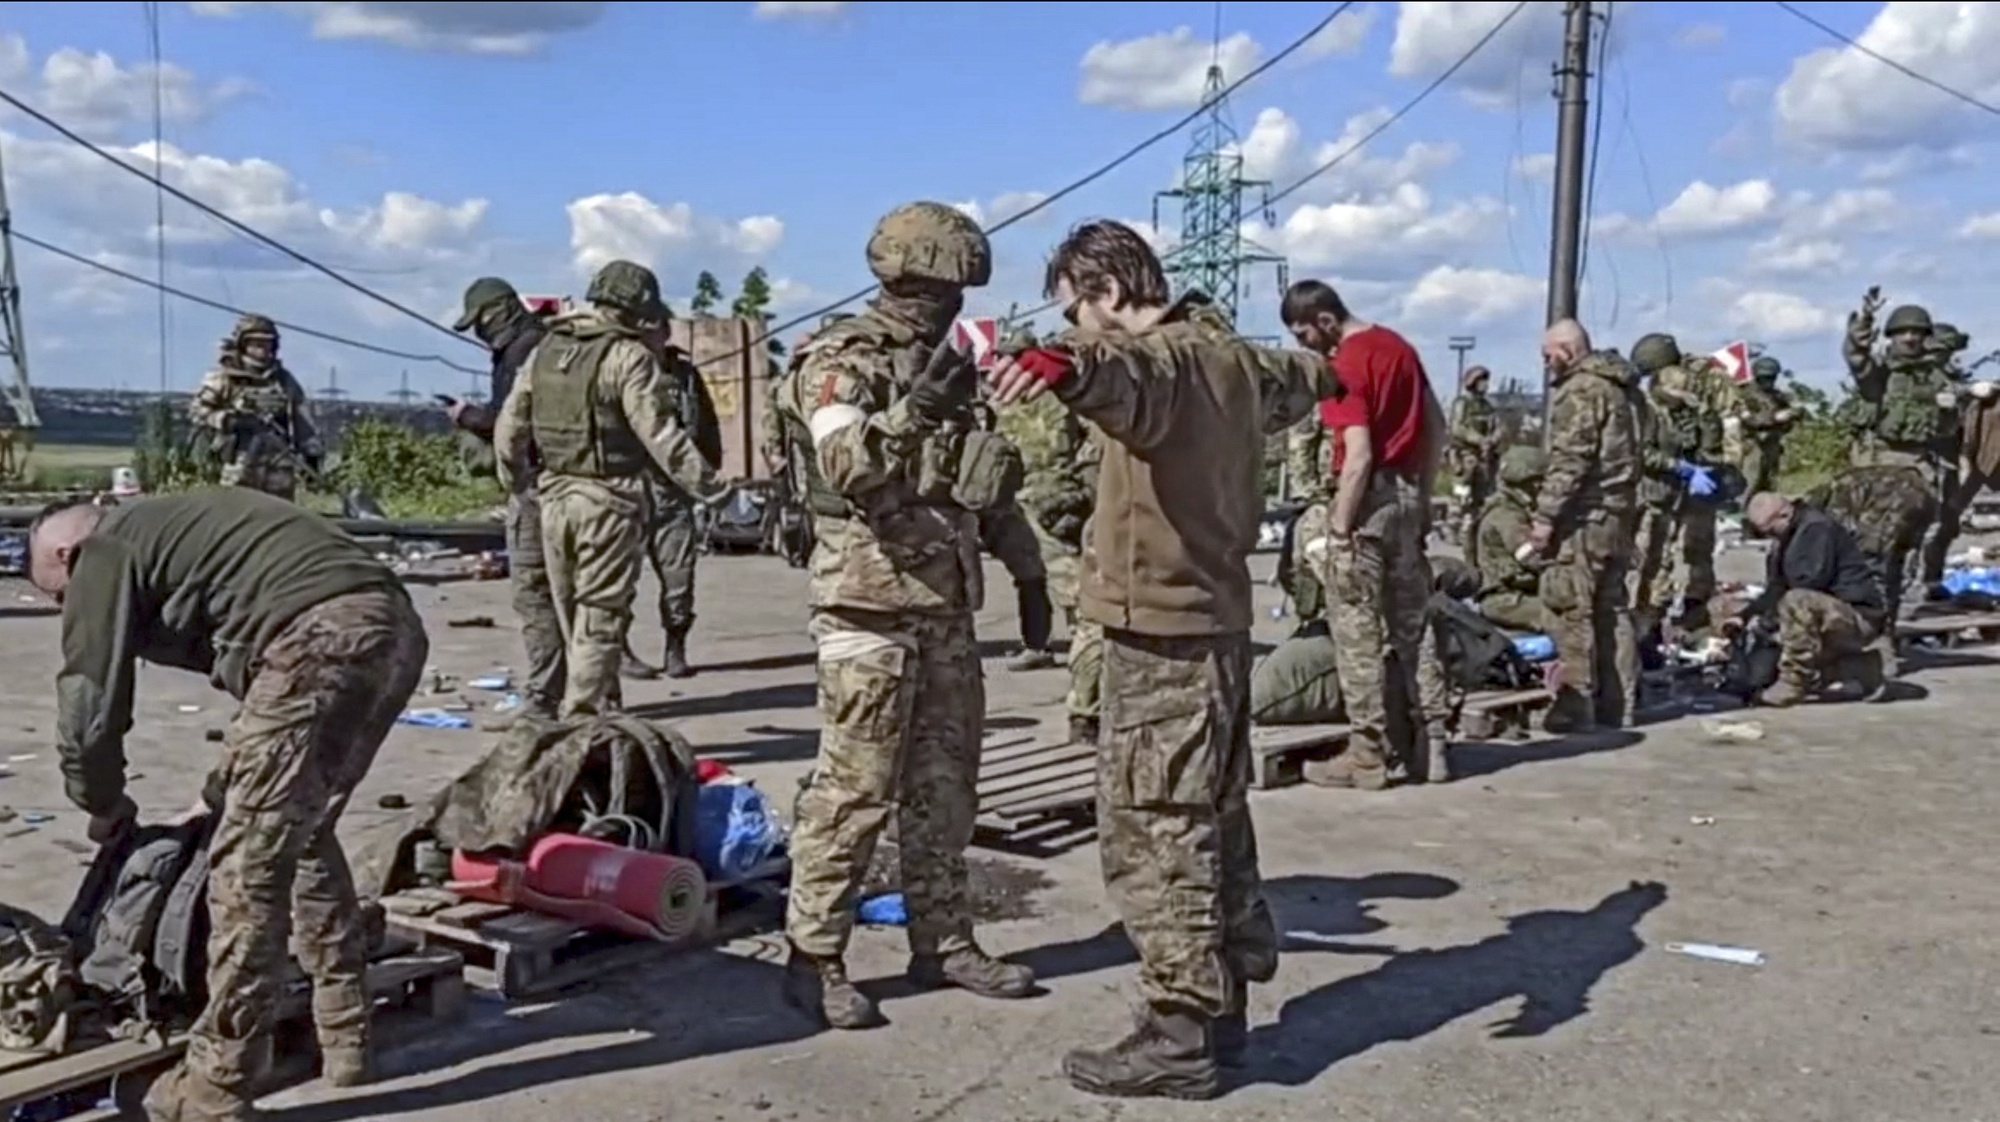 epa09962236 A still image taken from handout video made available on 21 May 2022 by the Russian Defence Ministry&#039;s press service shows Russian servicemen frisking Ukrainian servicemen evacuated from the besieged Azovstal steel plant in Mariupol, Ukraine, 20 May 2022 (issued 21 May 2022). The Chief spokesman of the Russian Defense Ministry, Major General Igor Konashenkov, said on 20 May that the Azofstal steel plant is now under full Russian army control. Russian troops entered Ukraine on 24 February 2022.  EPA/RUSSIAN DEFENCE MINISTRY PRESS SERVICE/HANDOUT BEST QUALITY AVAILABLE HANDOUT EDITORIAL USE ONLY/NO SALES